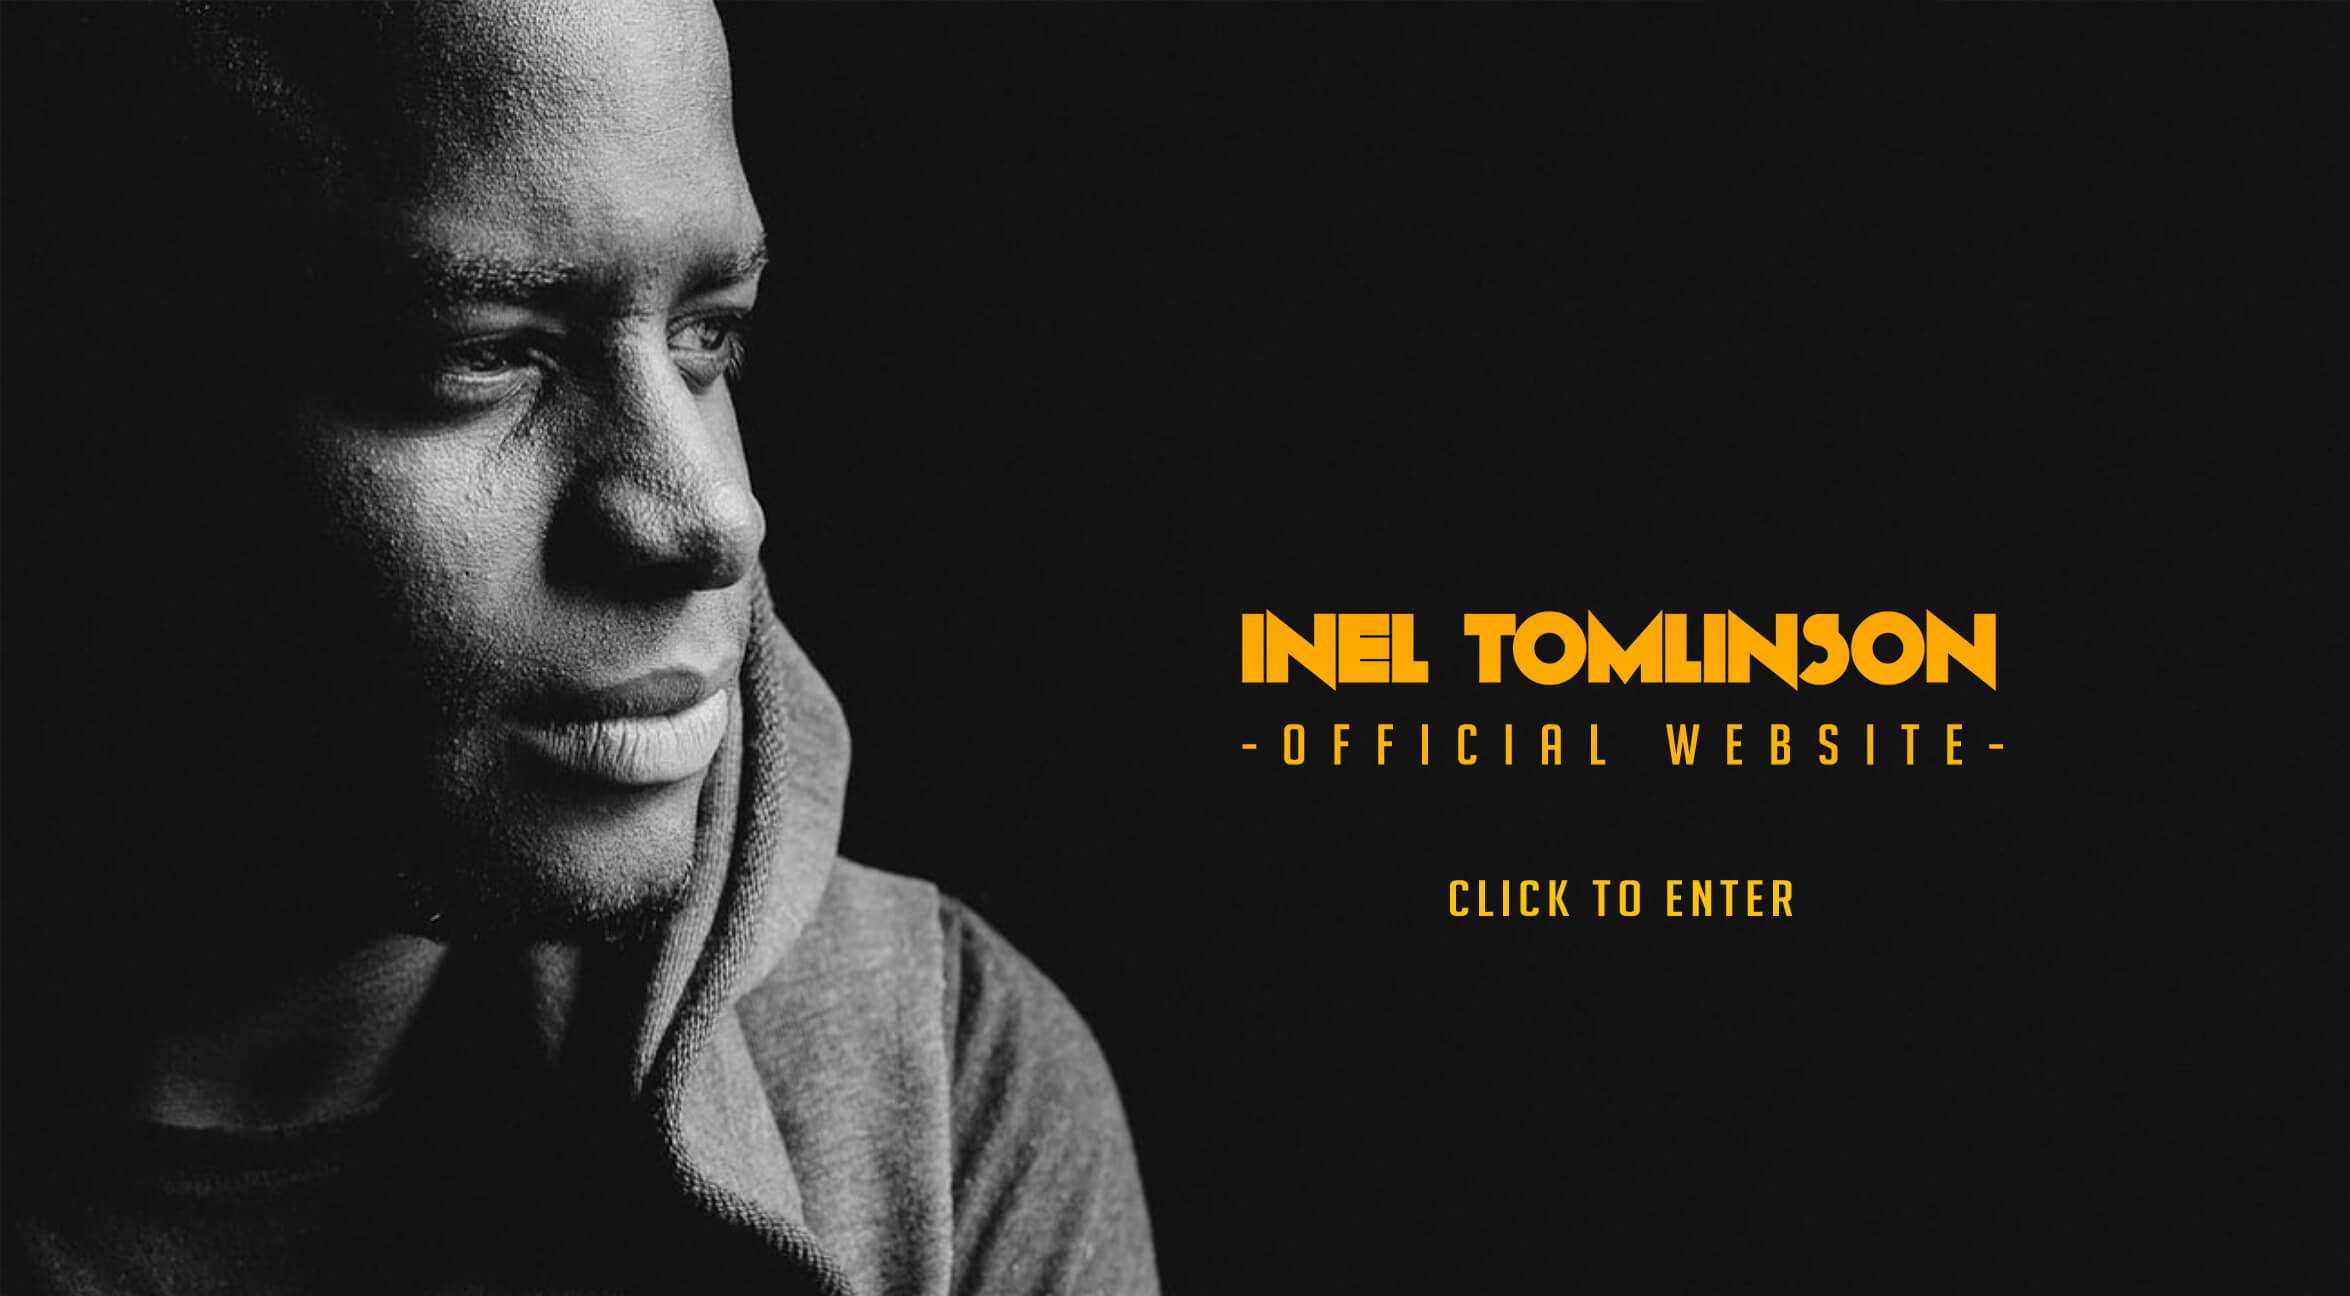 Inel Tomlinson - Click to Enter